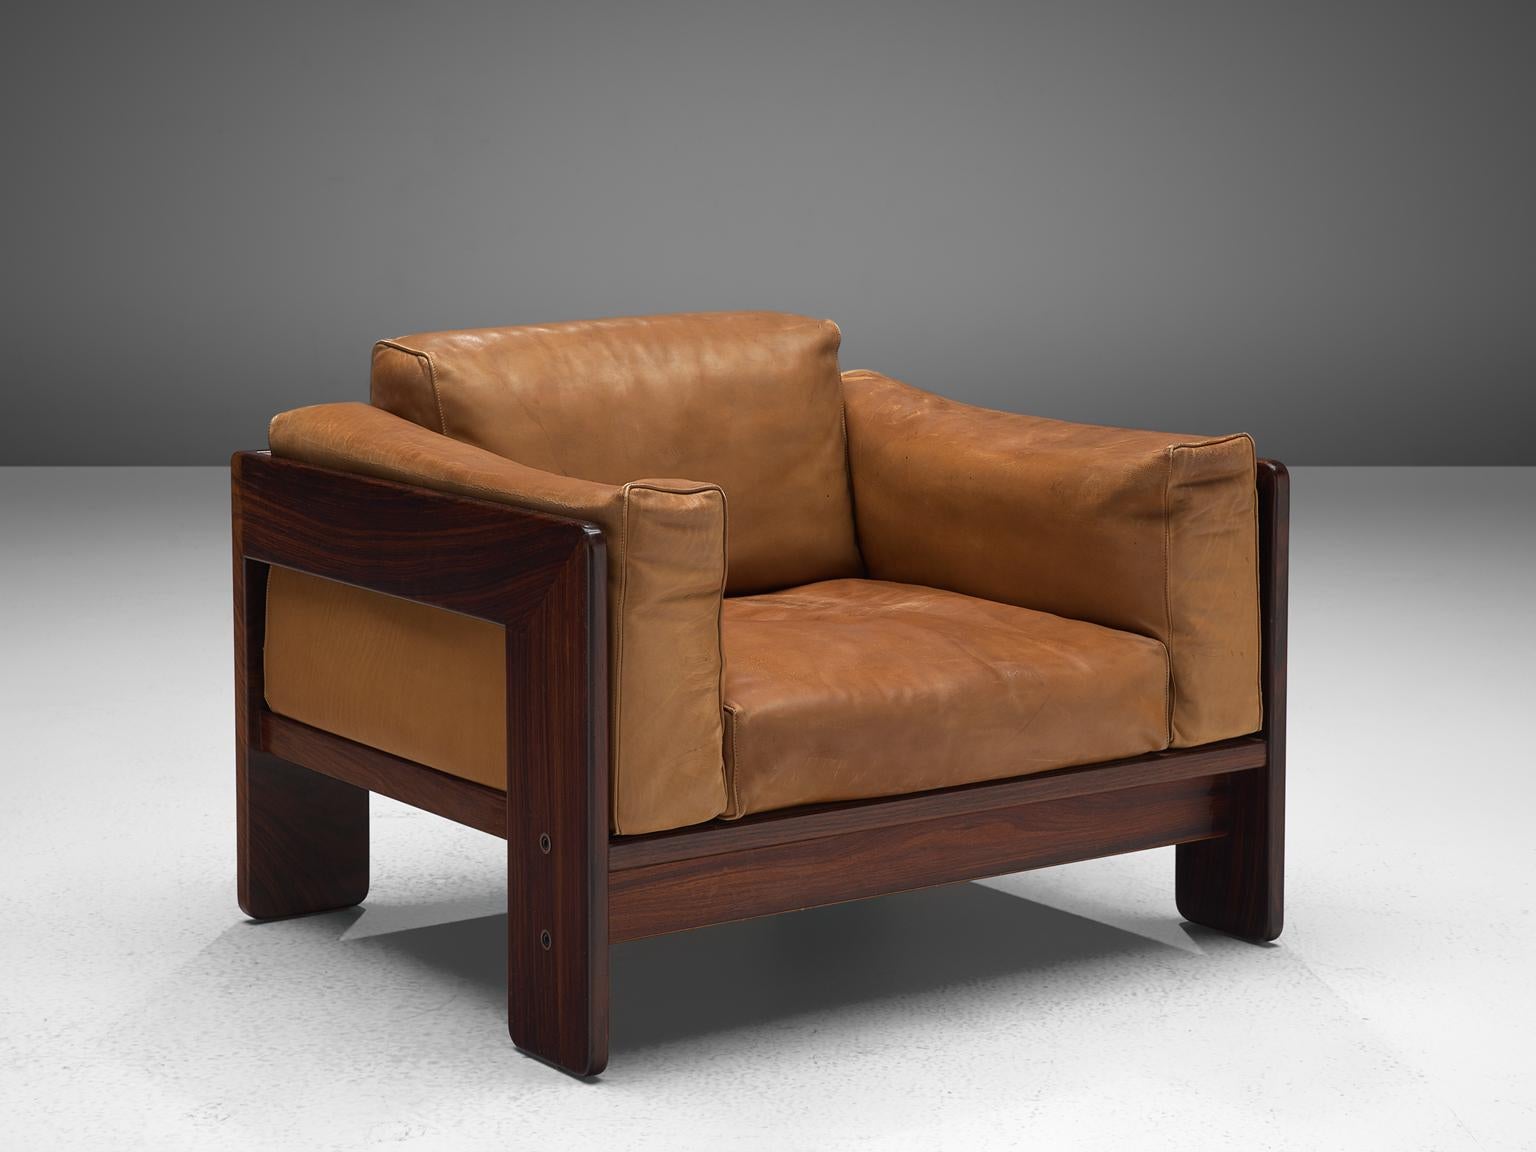 Tobia Scarpa 'Bastiano' Living Room Set in Rosewood and Cognac Leather 3